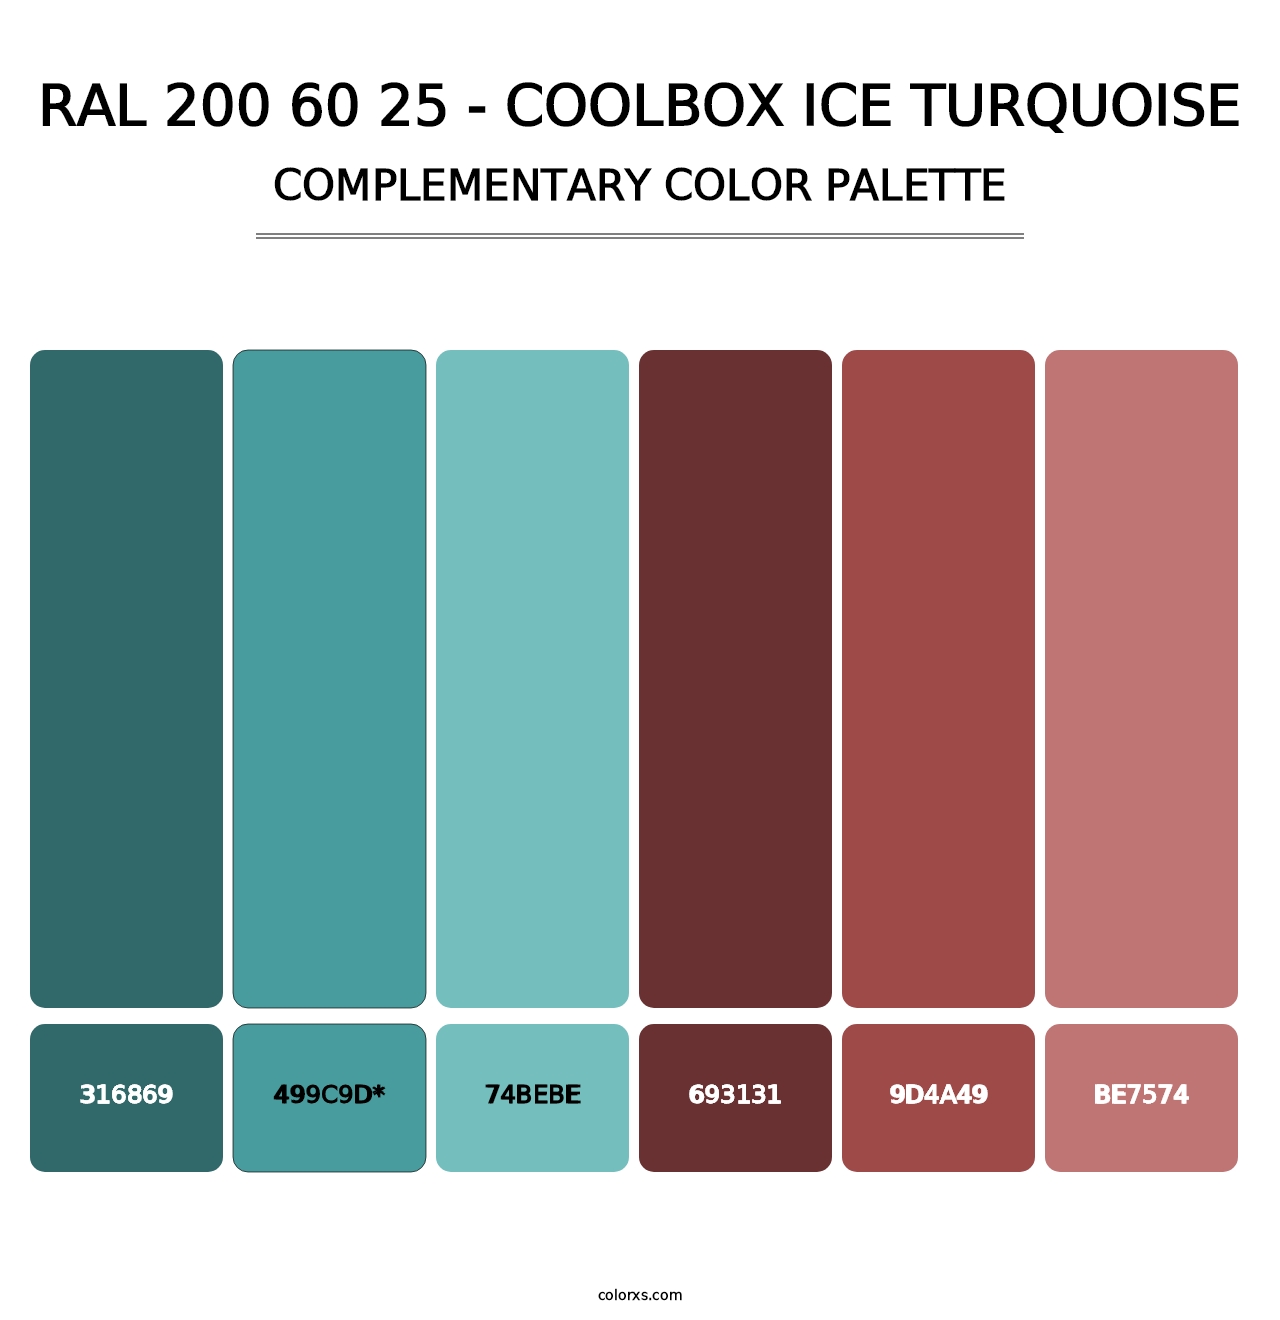 RAL 200 60 25 - Coolbox Ice Turquoise - Complementary Color Palette